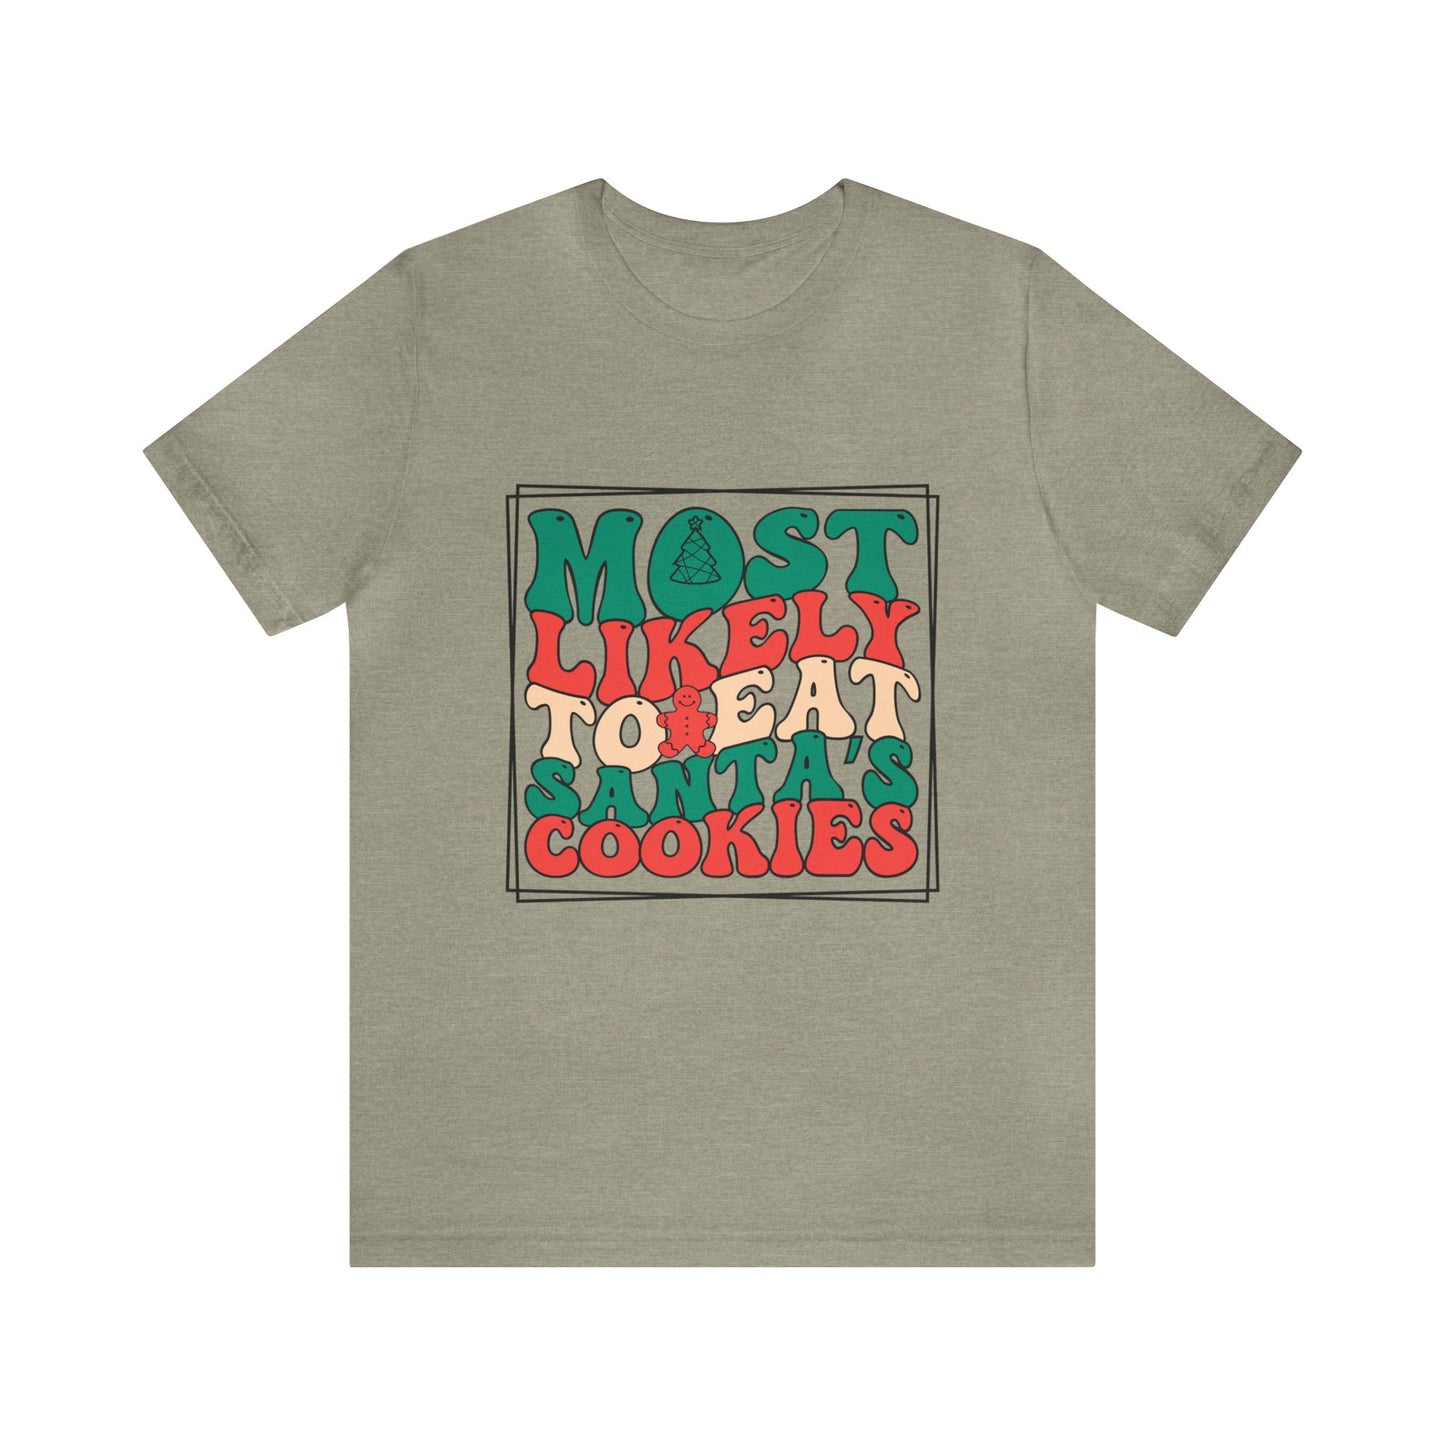 Most Likely to Eat Santa's Cookies Funny Adult Unisex Short Sleeve Christmas T Shirts